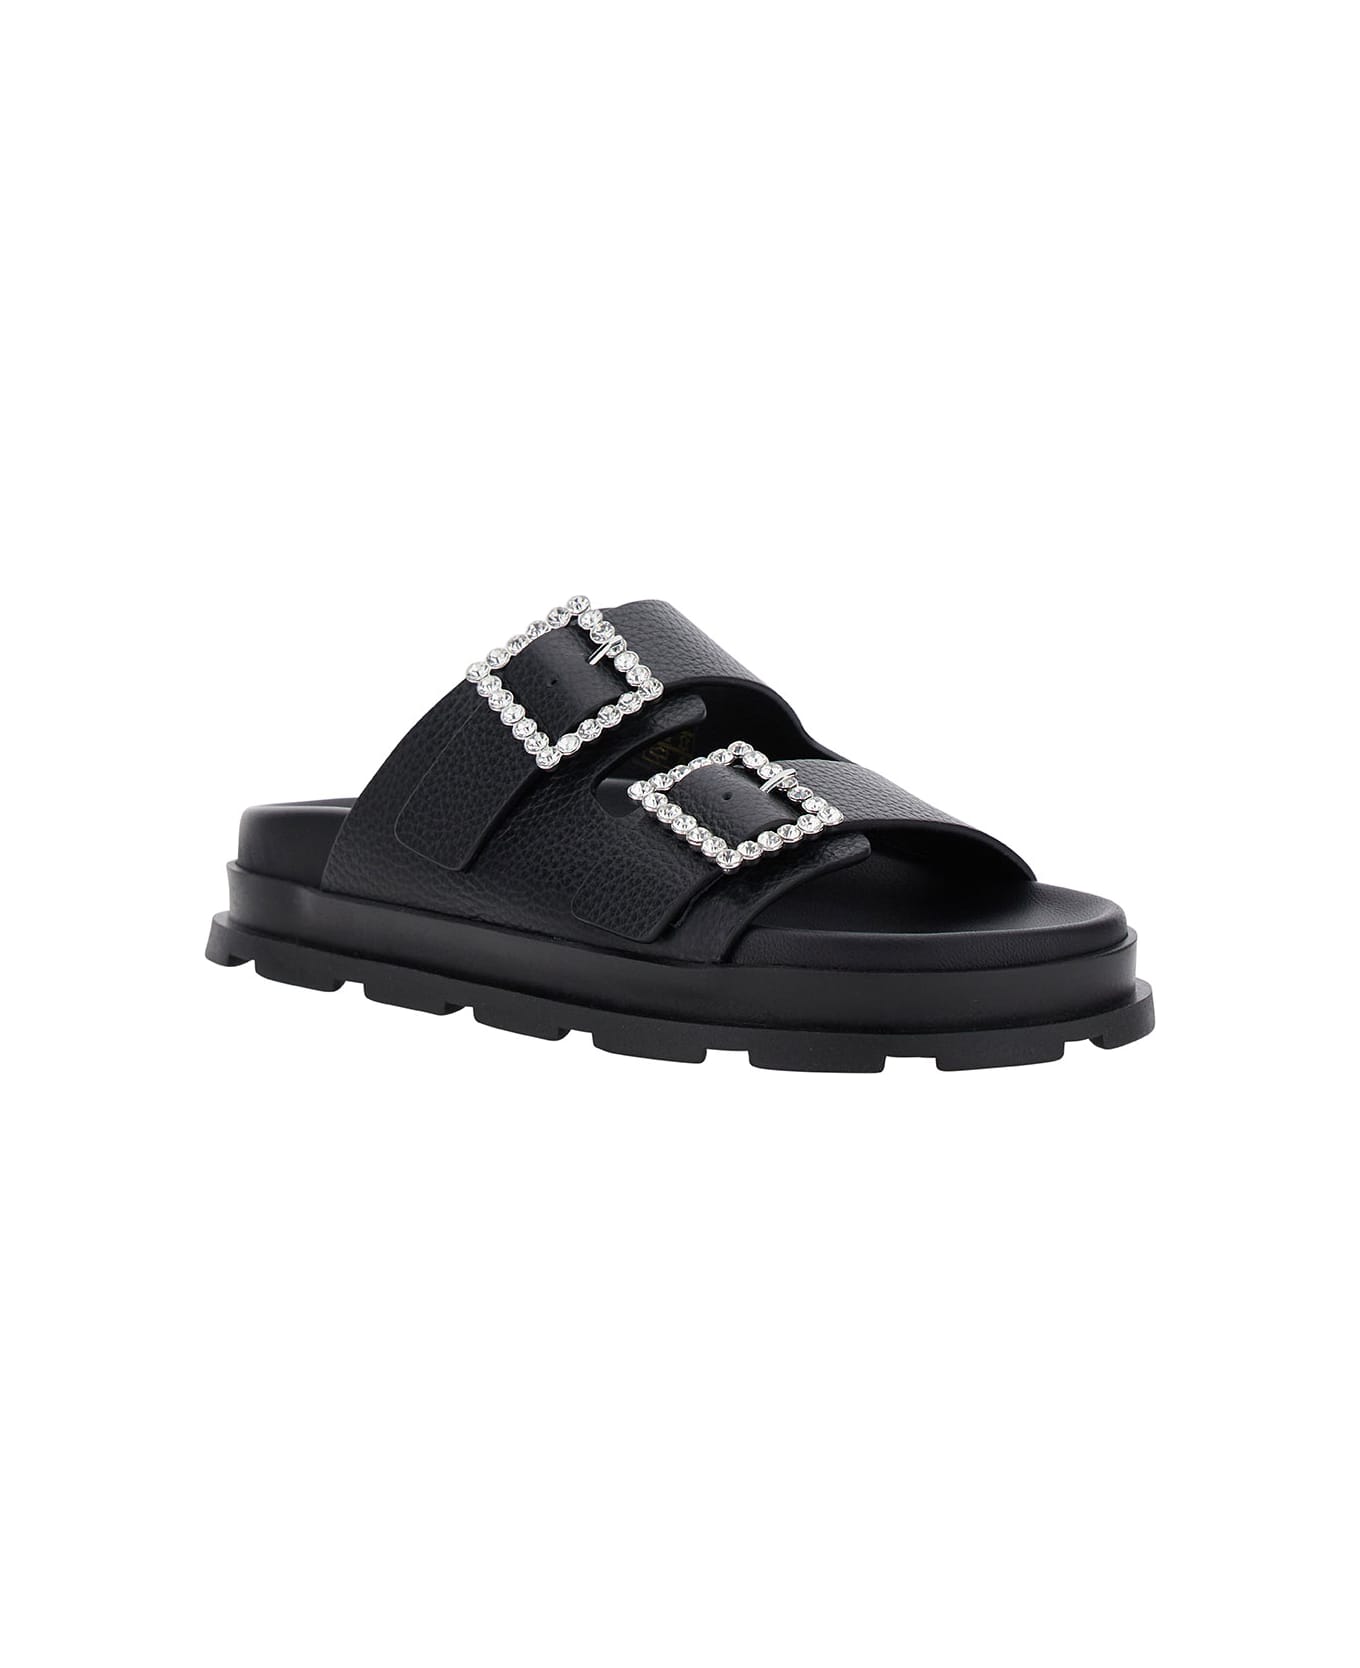 Pollini Black Sandals With Rhinestone Buckle In Hammered Leather Woman - Black